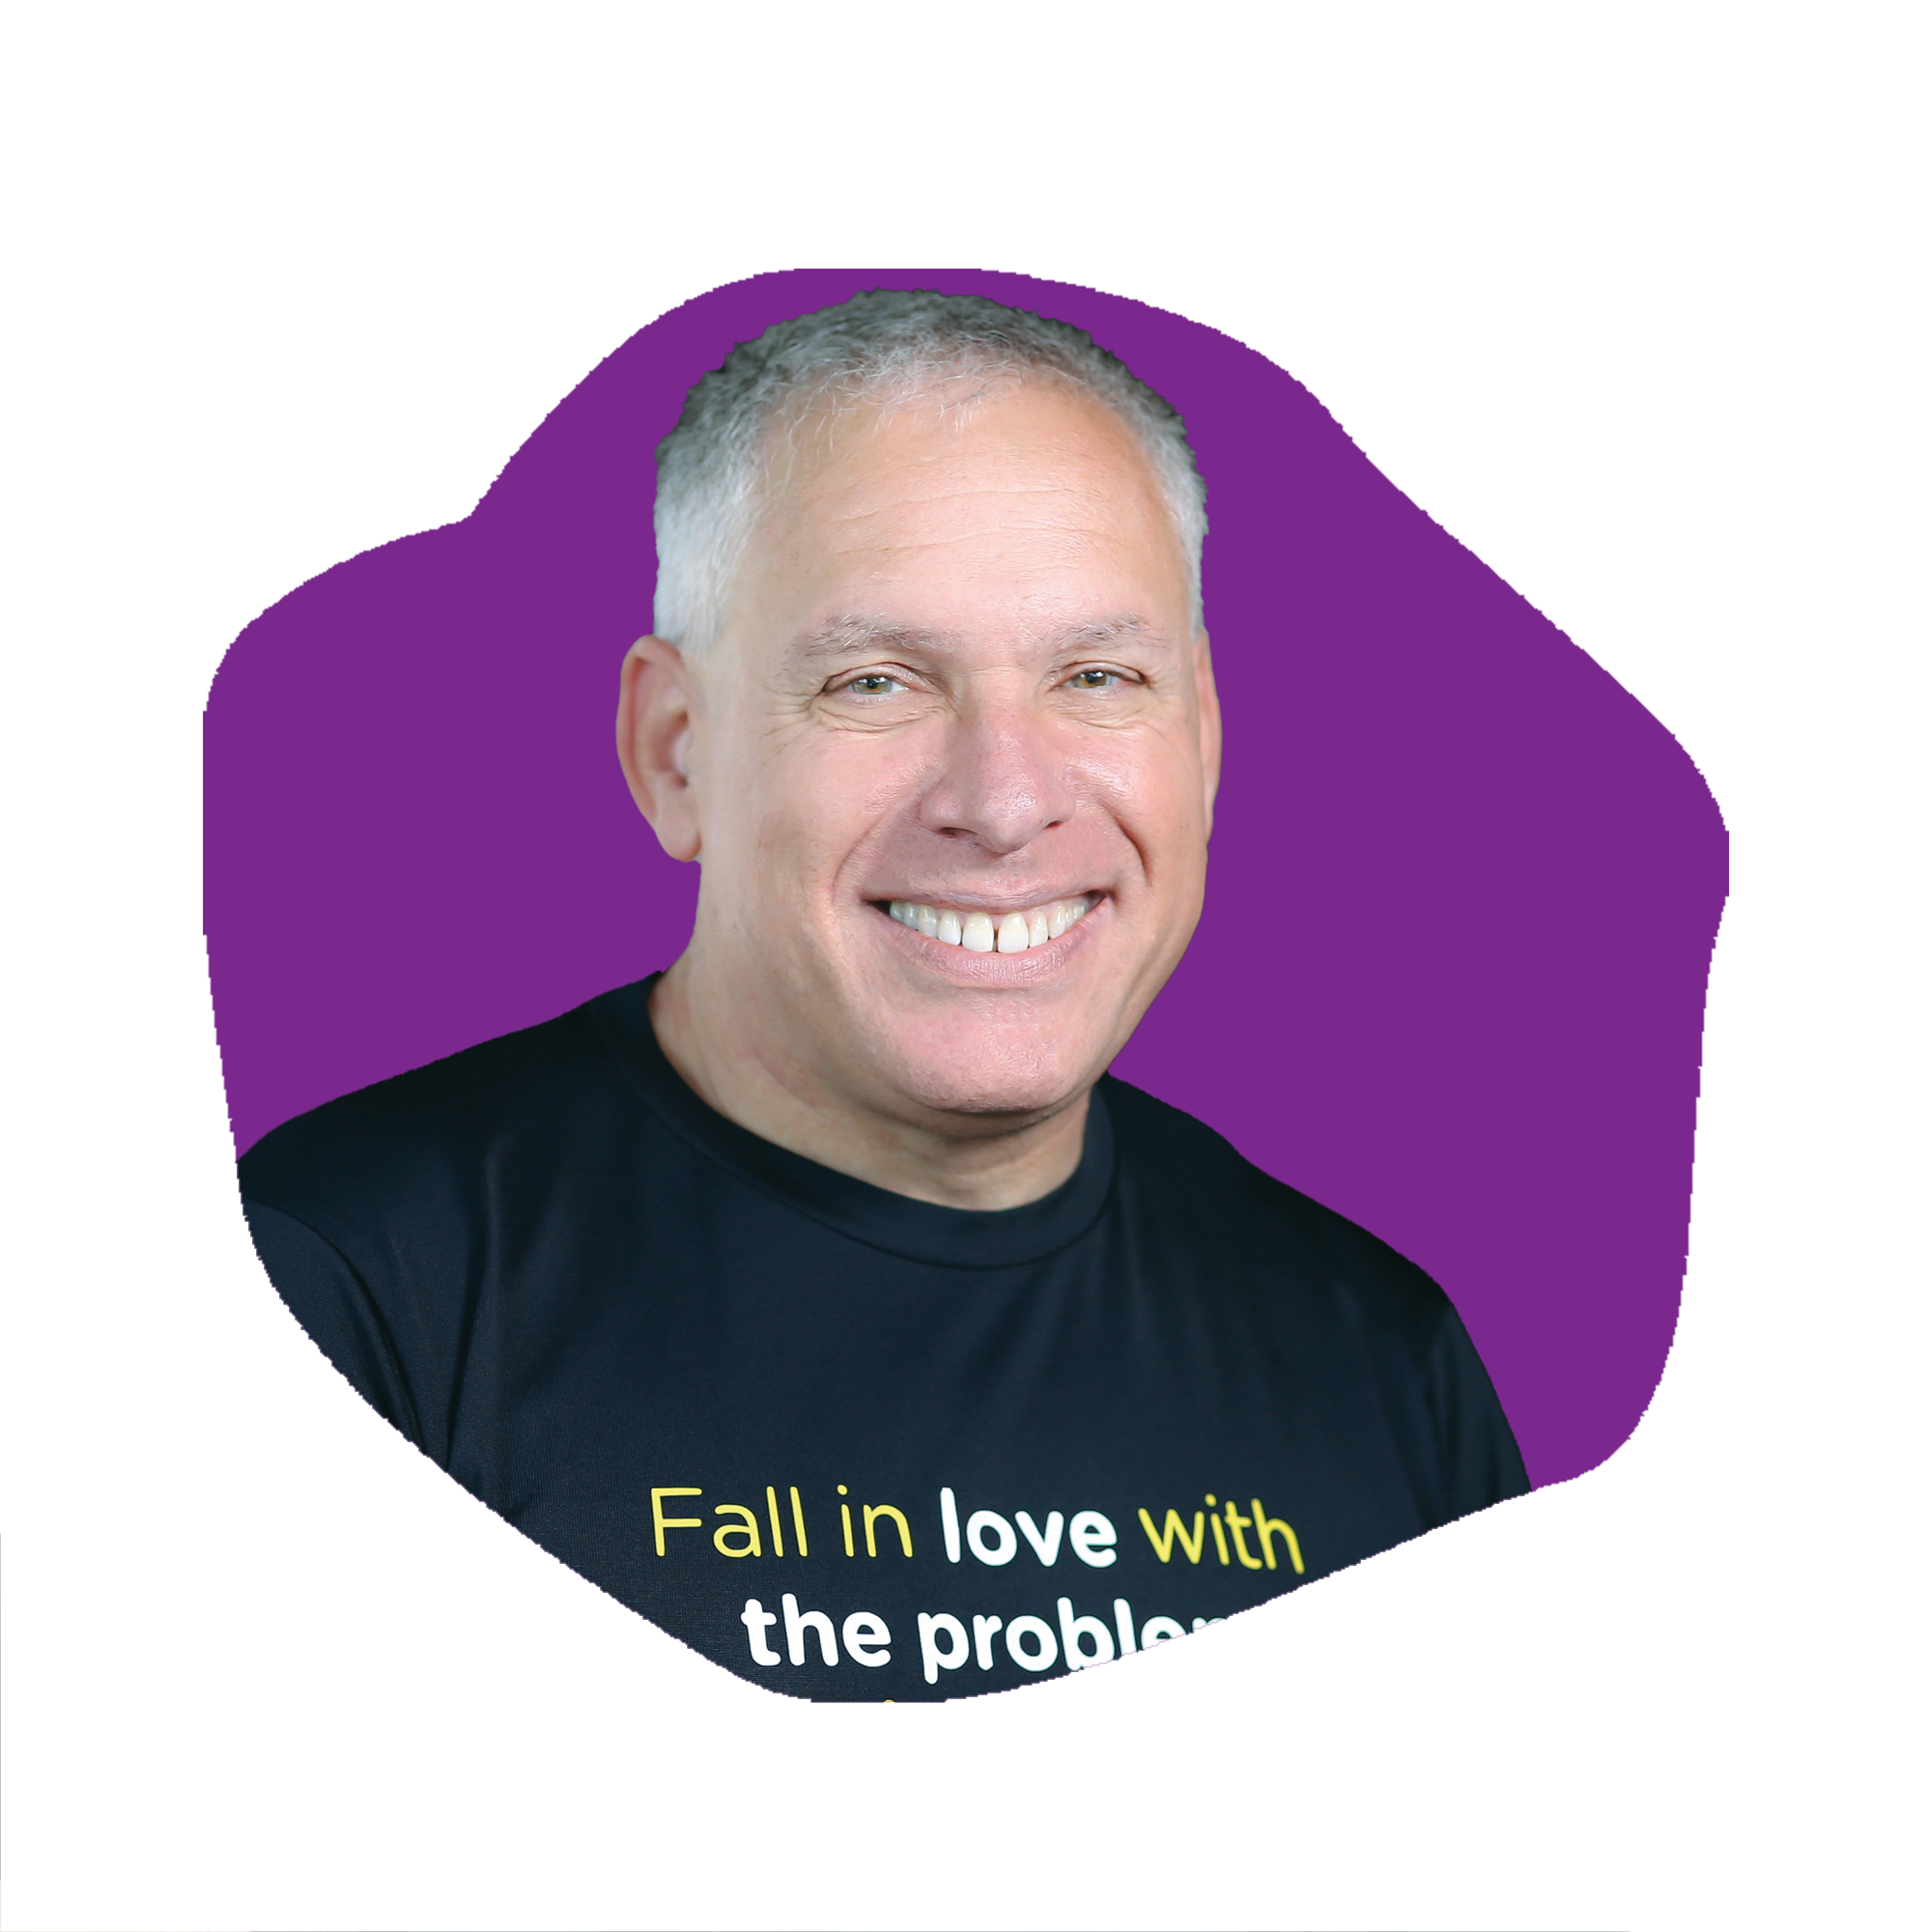 Uri Levine: Co-Founder of Waze & Author of Fall In Love With The Problem,  Not The Solution - The Kara Goldin Show